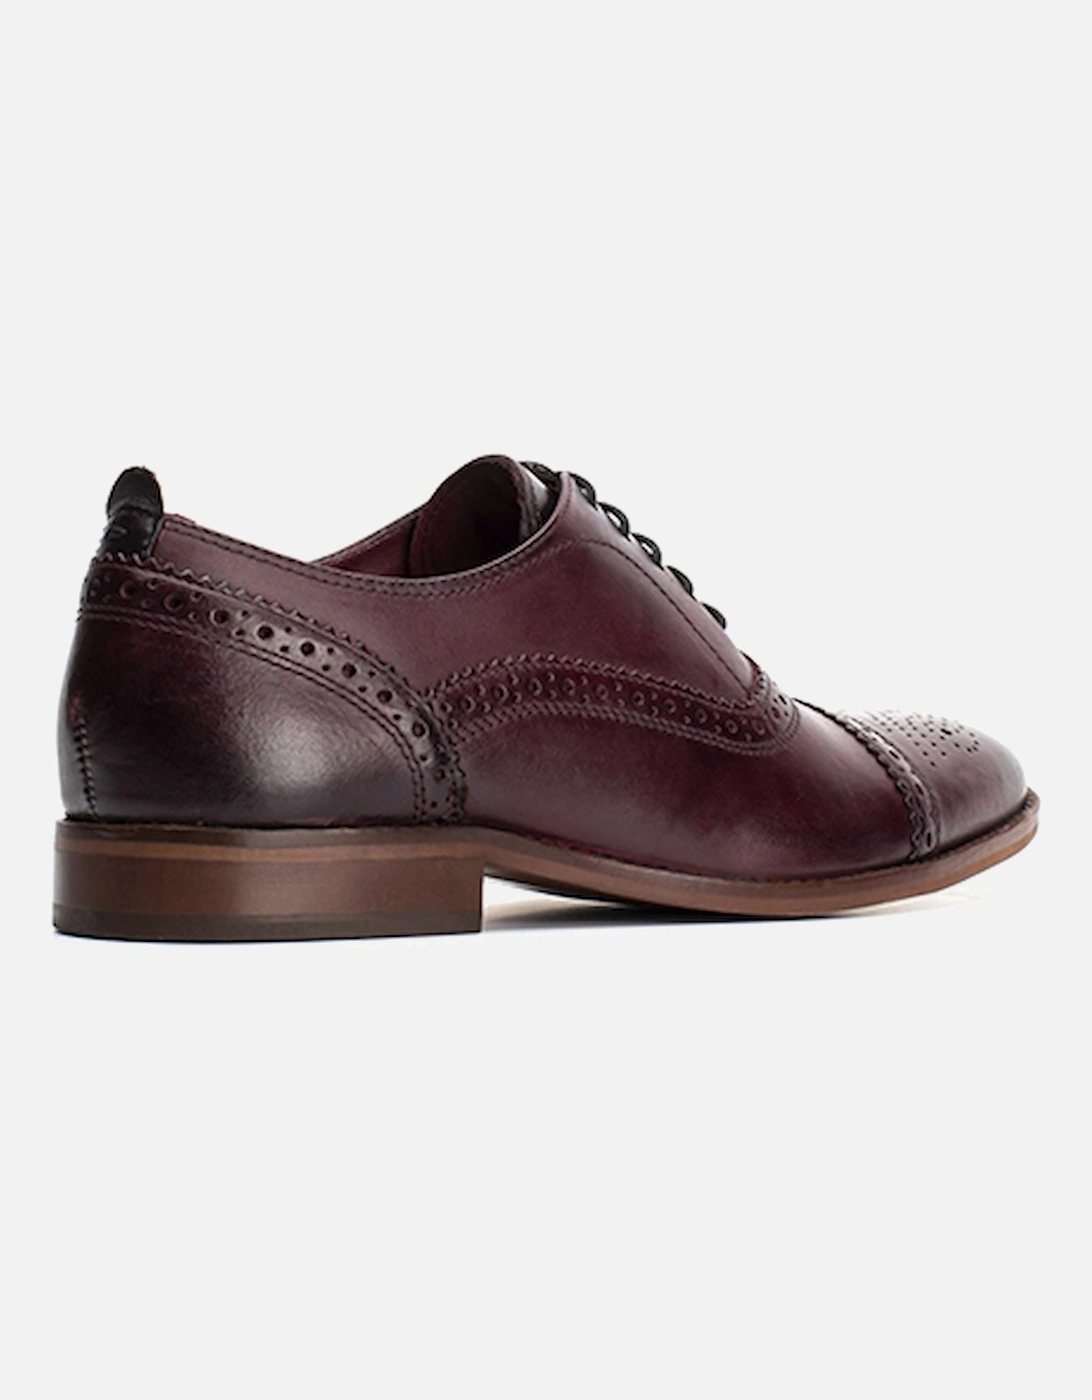 London Men's Cast Washed Lace Up Brogue Shoe Dark Red DFS